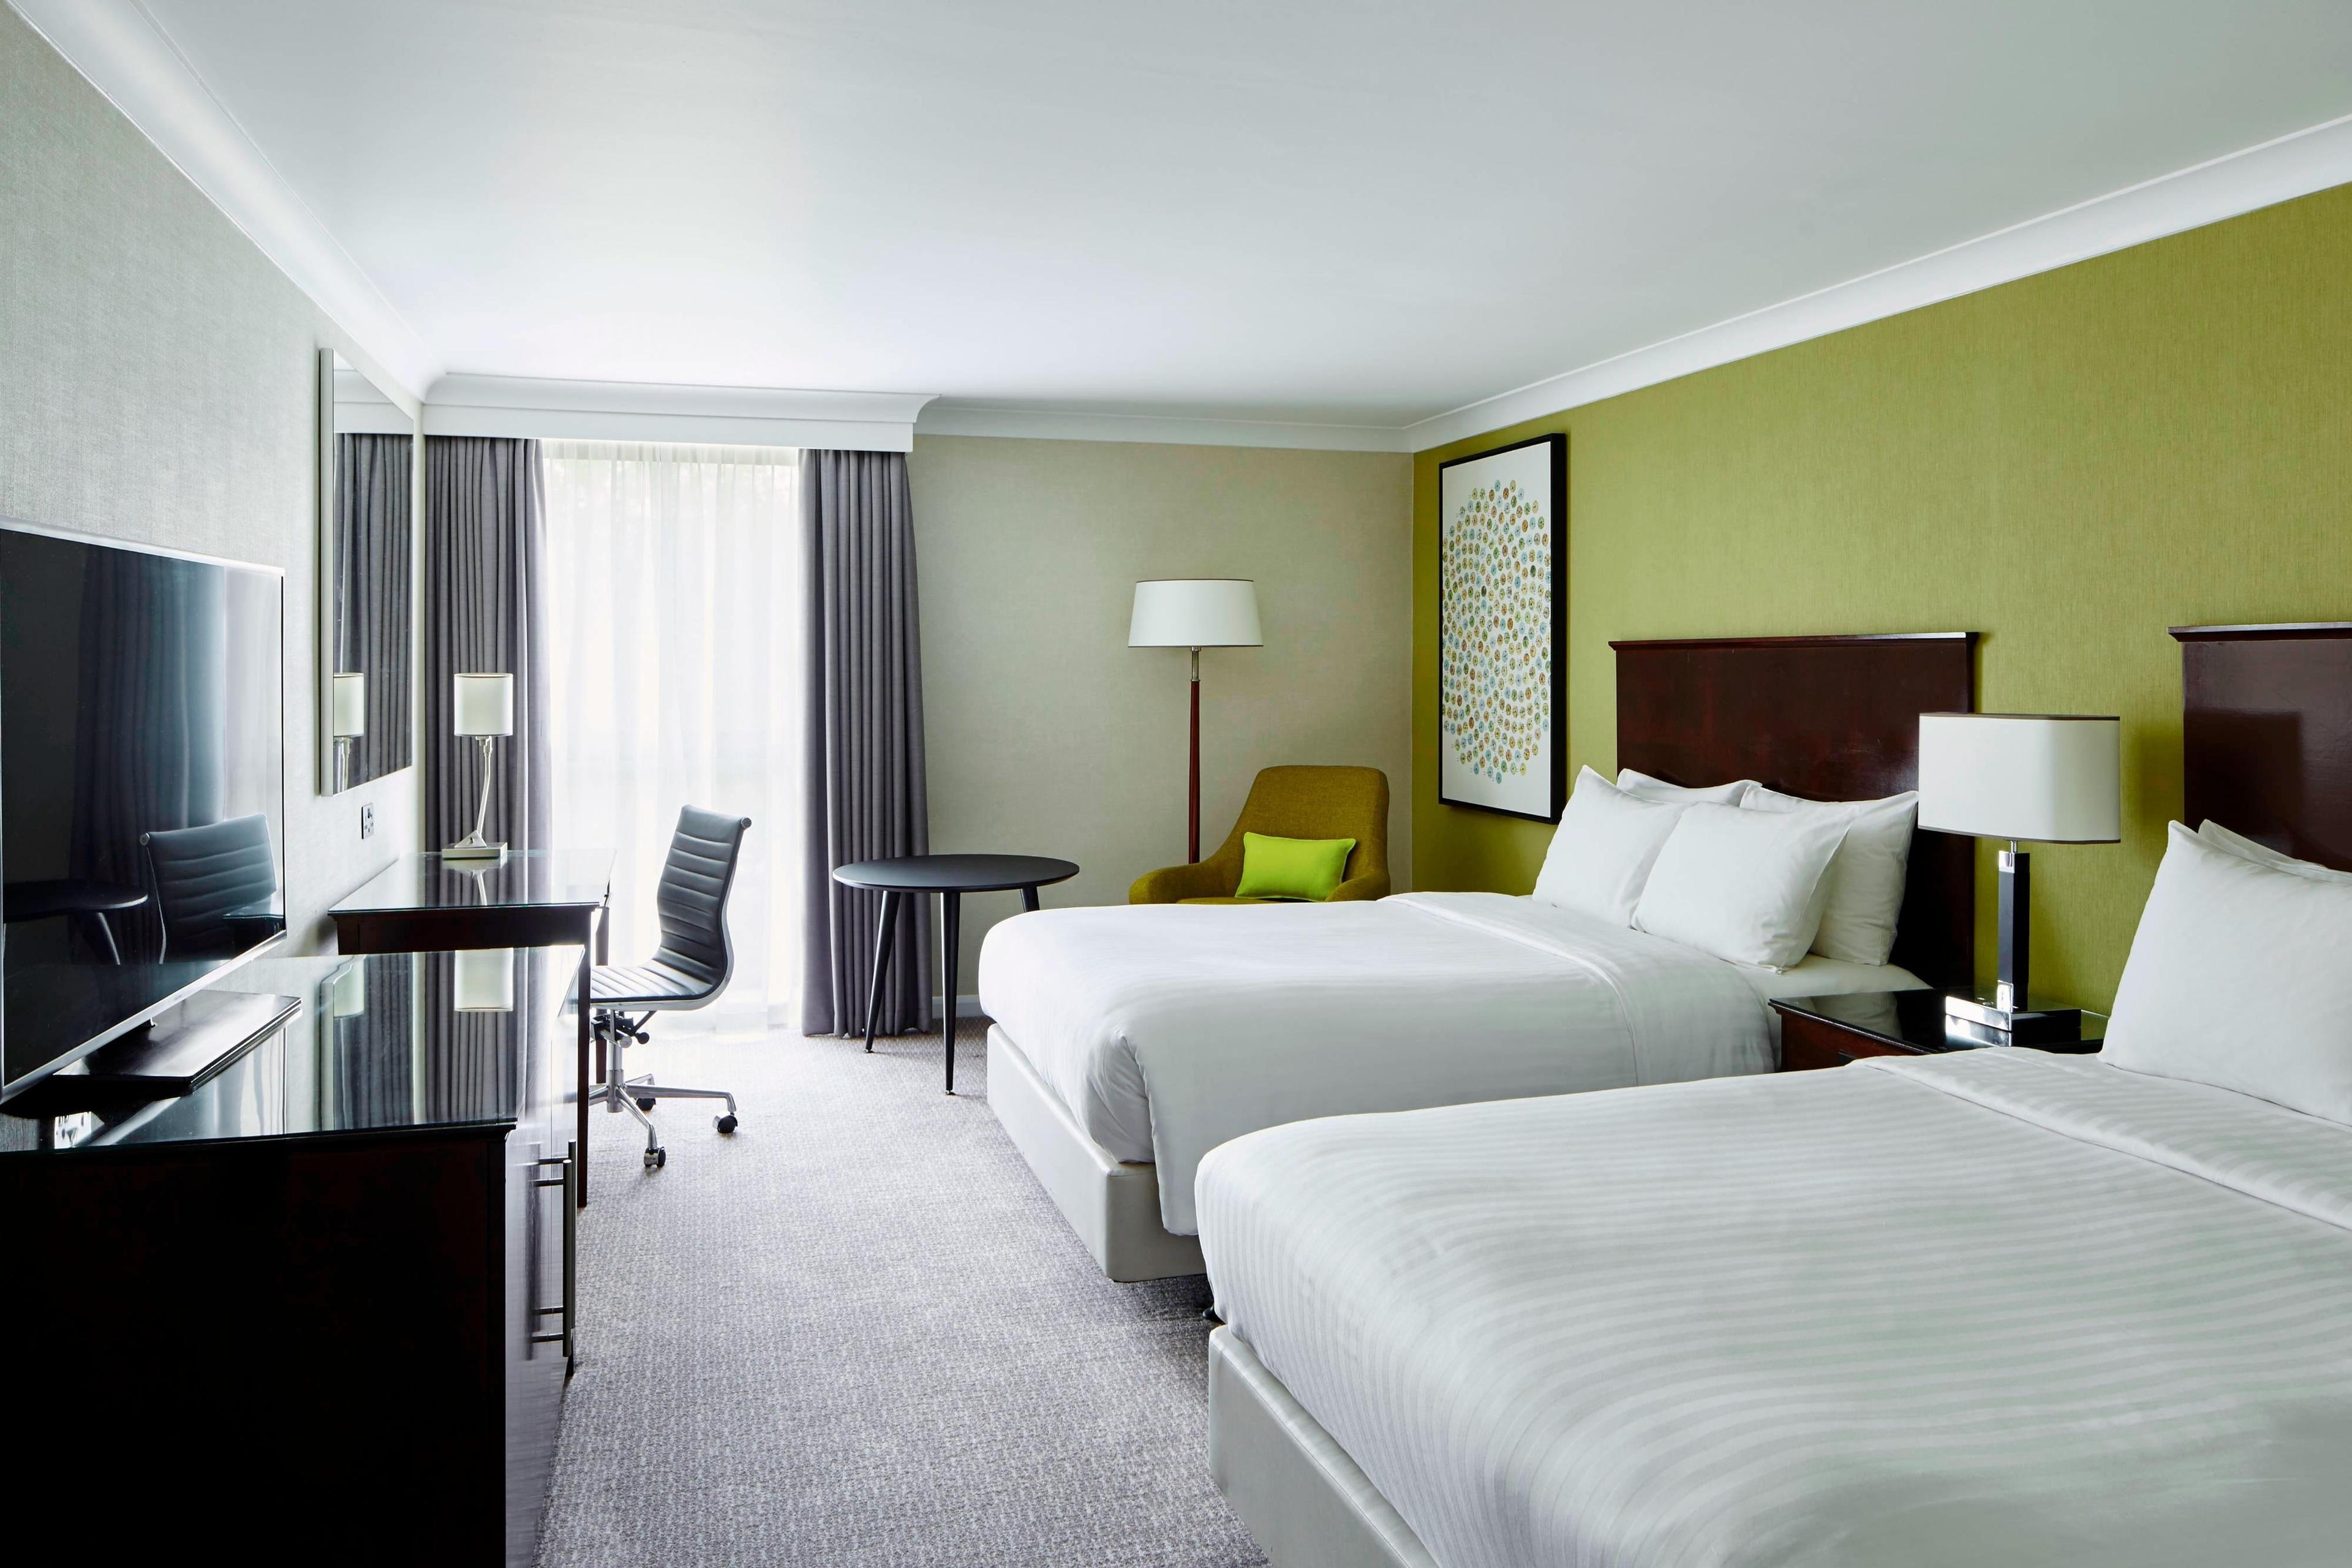 All double/double guest rooms at Manchester Airport Marriott Hotel feature two large double beds, a 49-inch flat screen TV and high-speed Internet access.